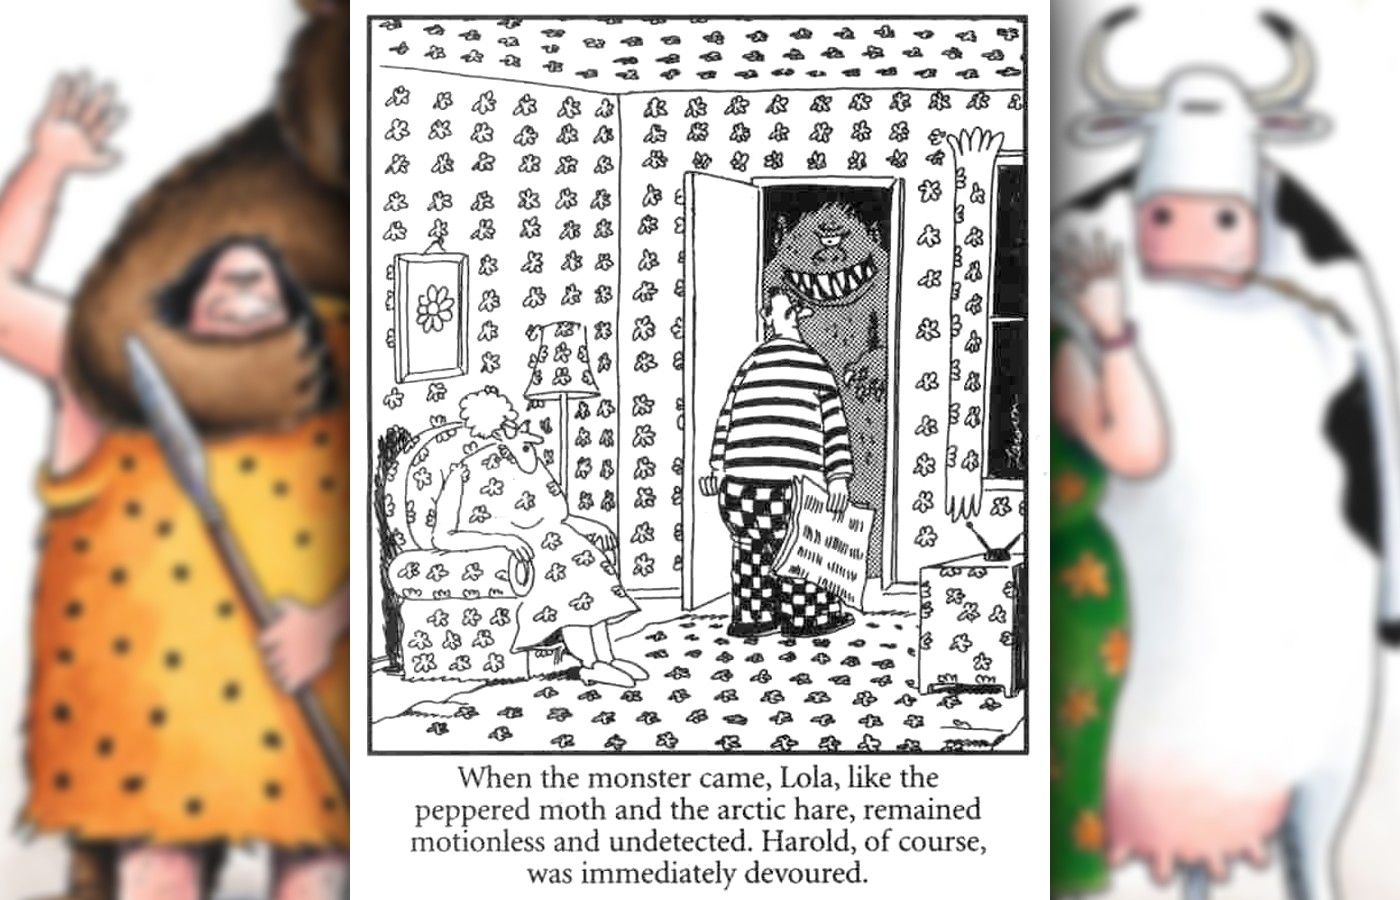 far side comic where a woman is hidden from a monster by her dress camoflaging with the wallpaper